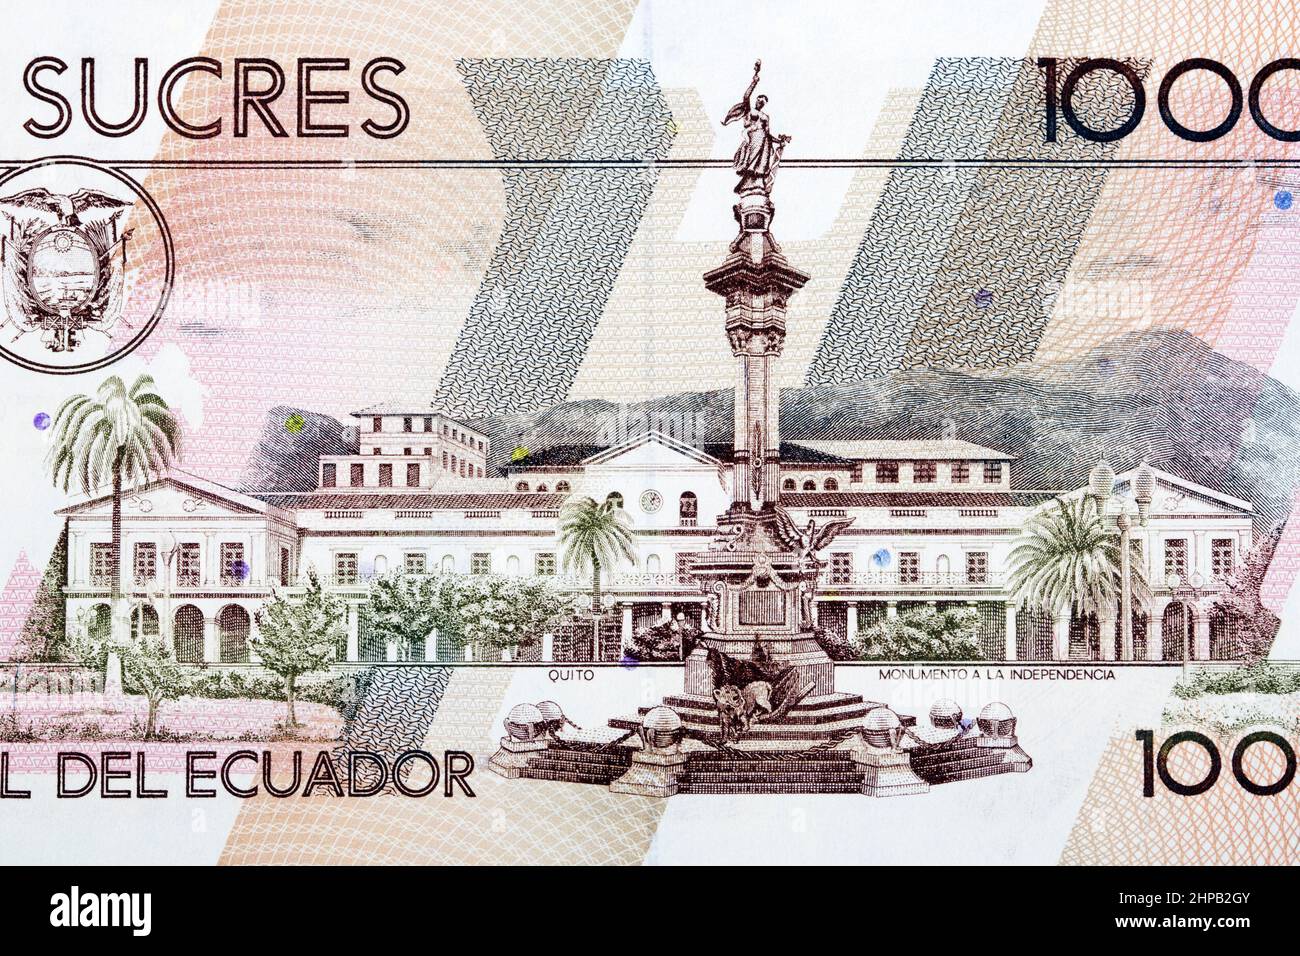 Monument to impedance from old Ecuadorian money - Sucres Stock Photo